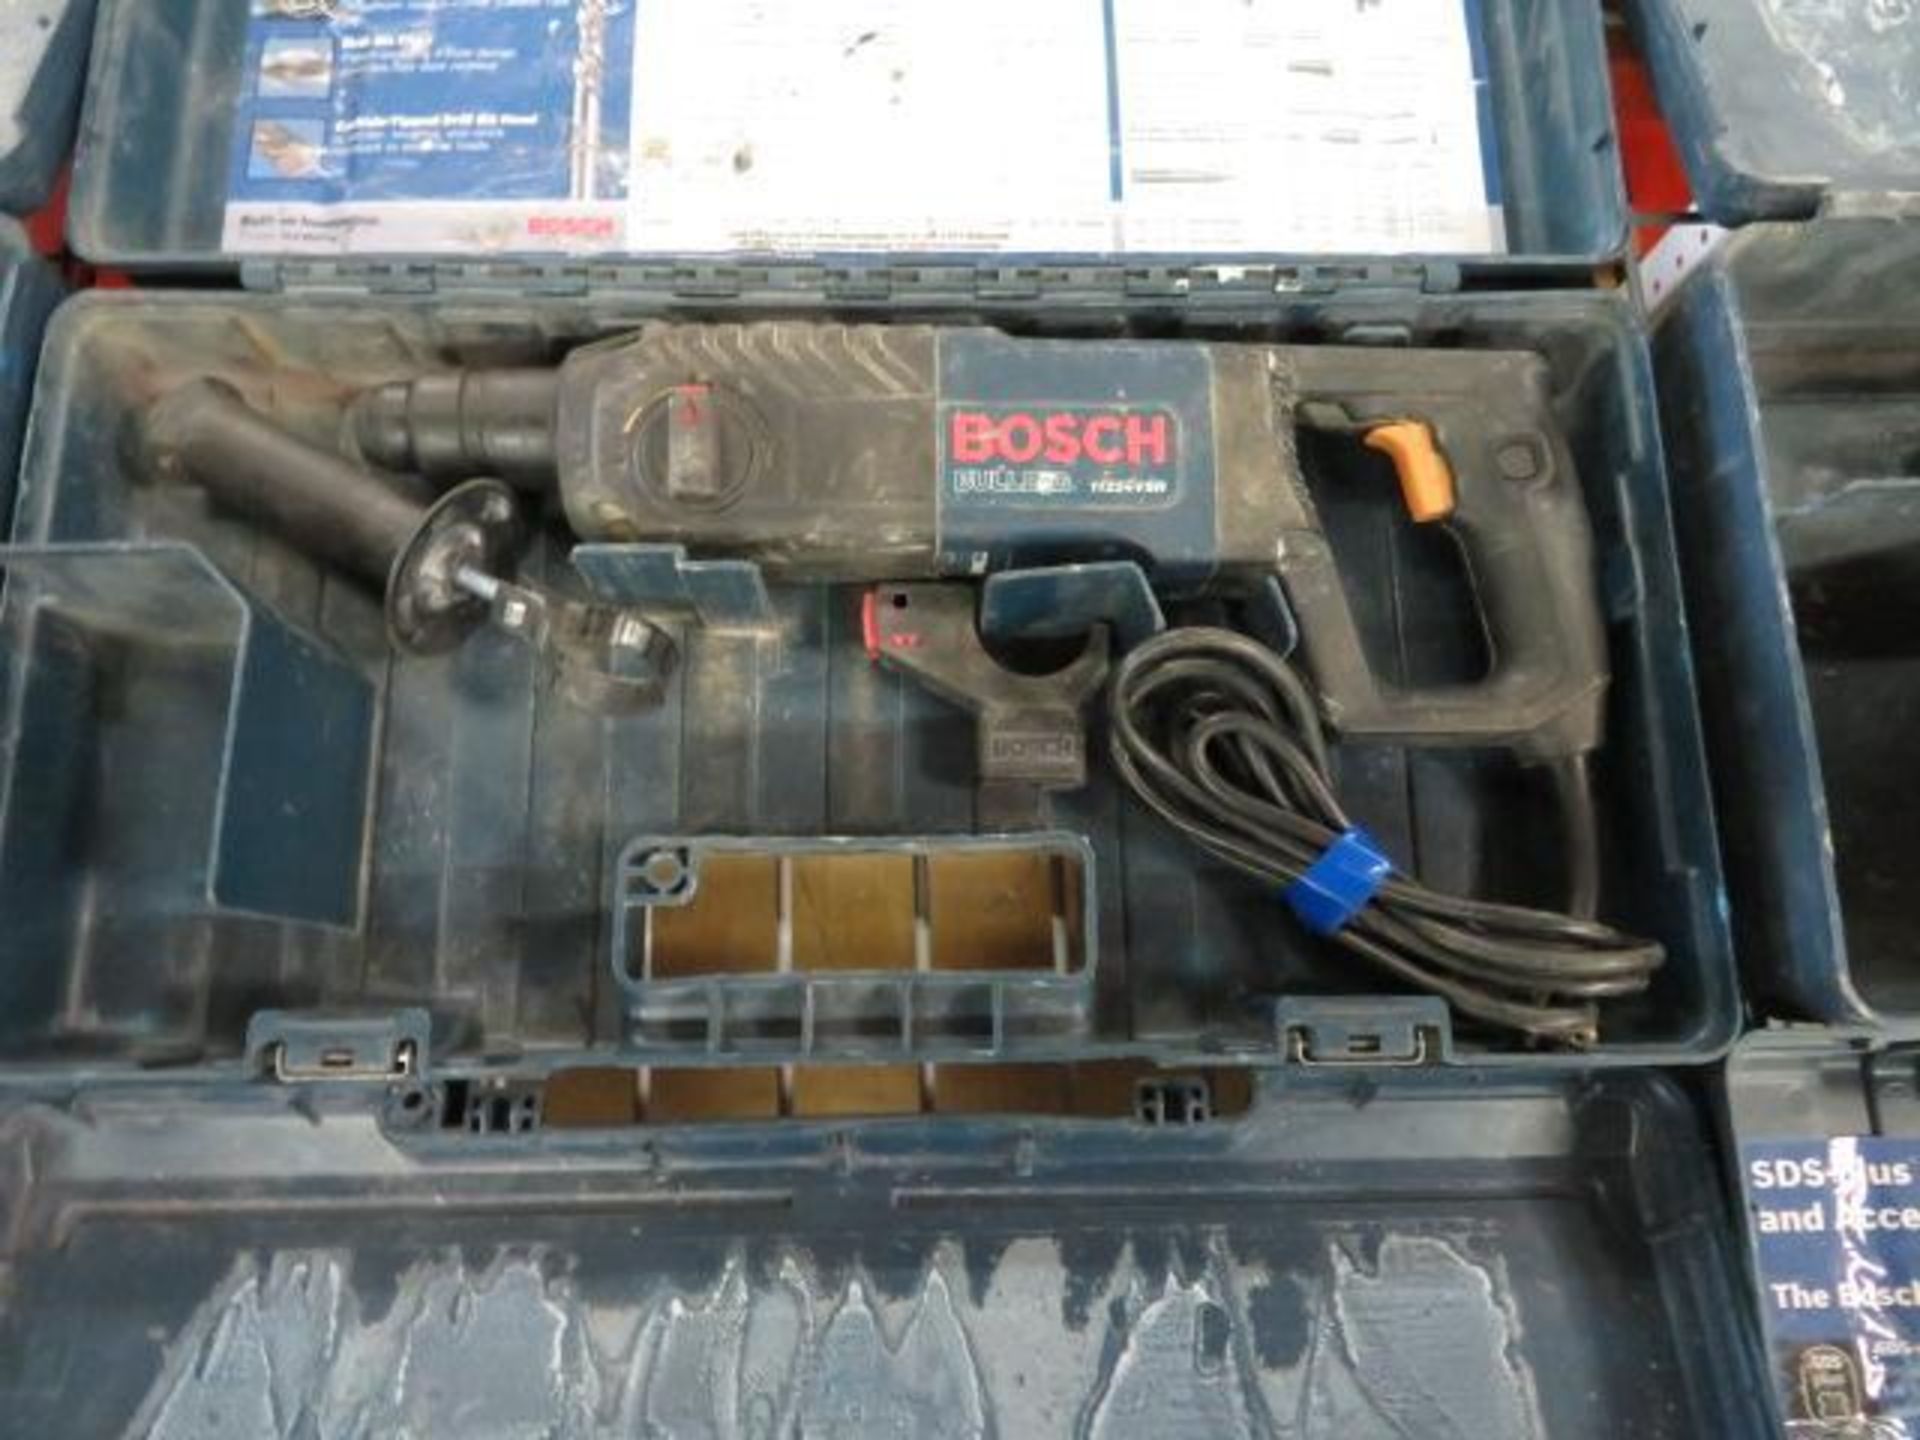 Bosch 11224VSR Electric Hammer Drill, with Case